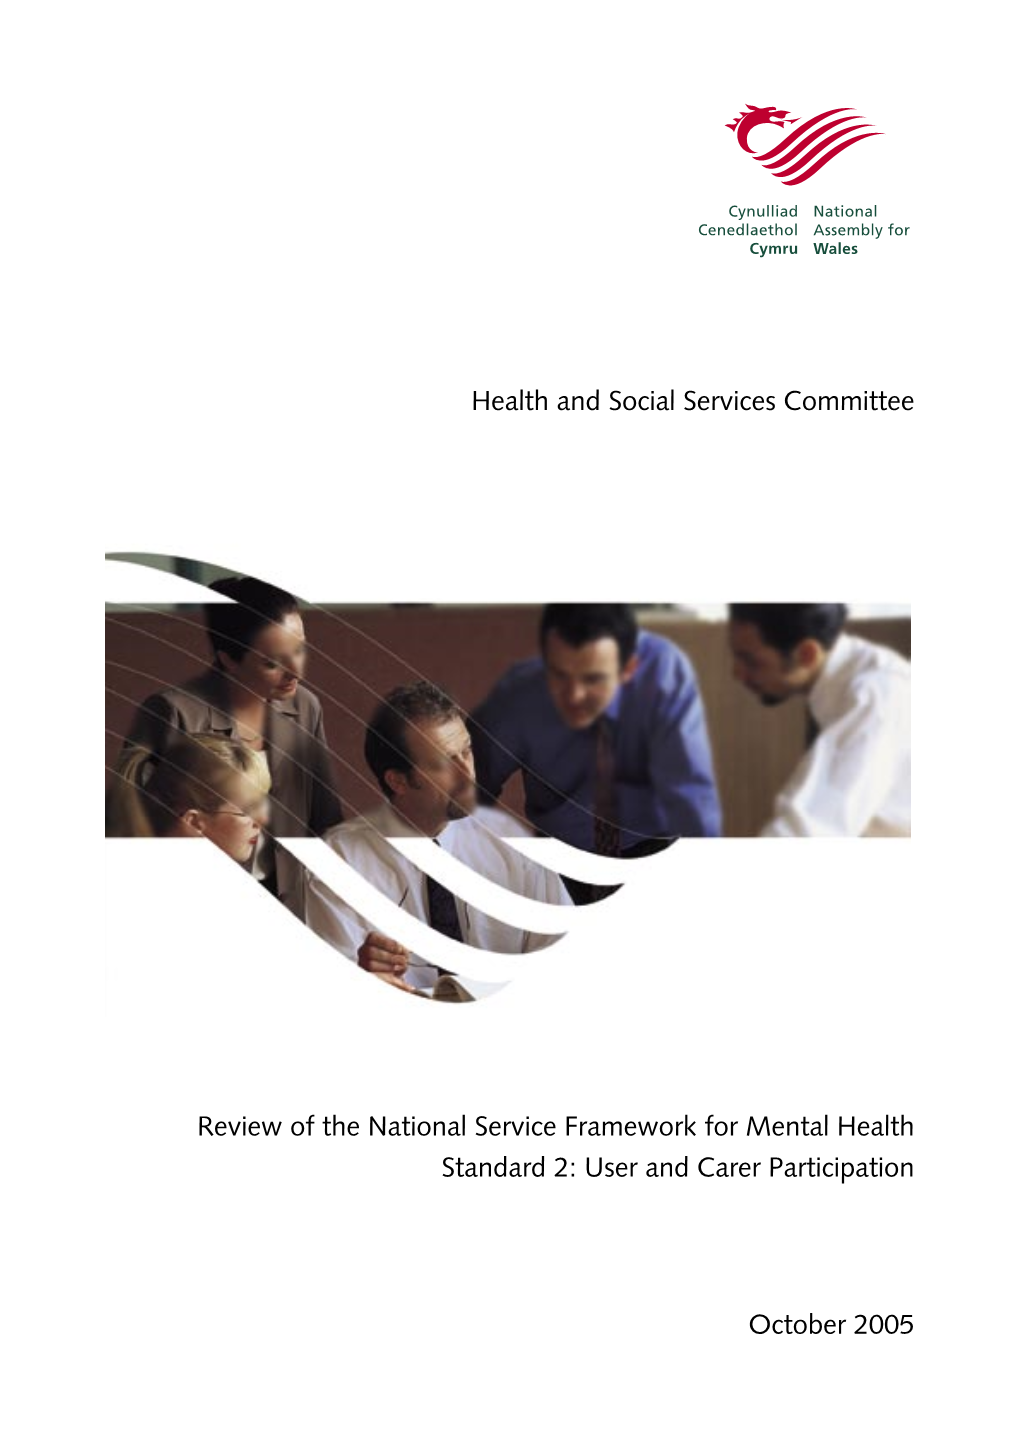 Health and Social Services Committee Review of The